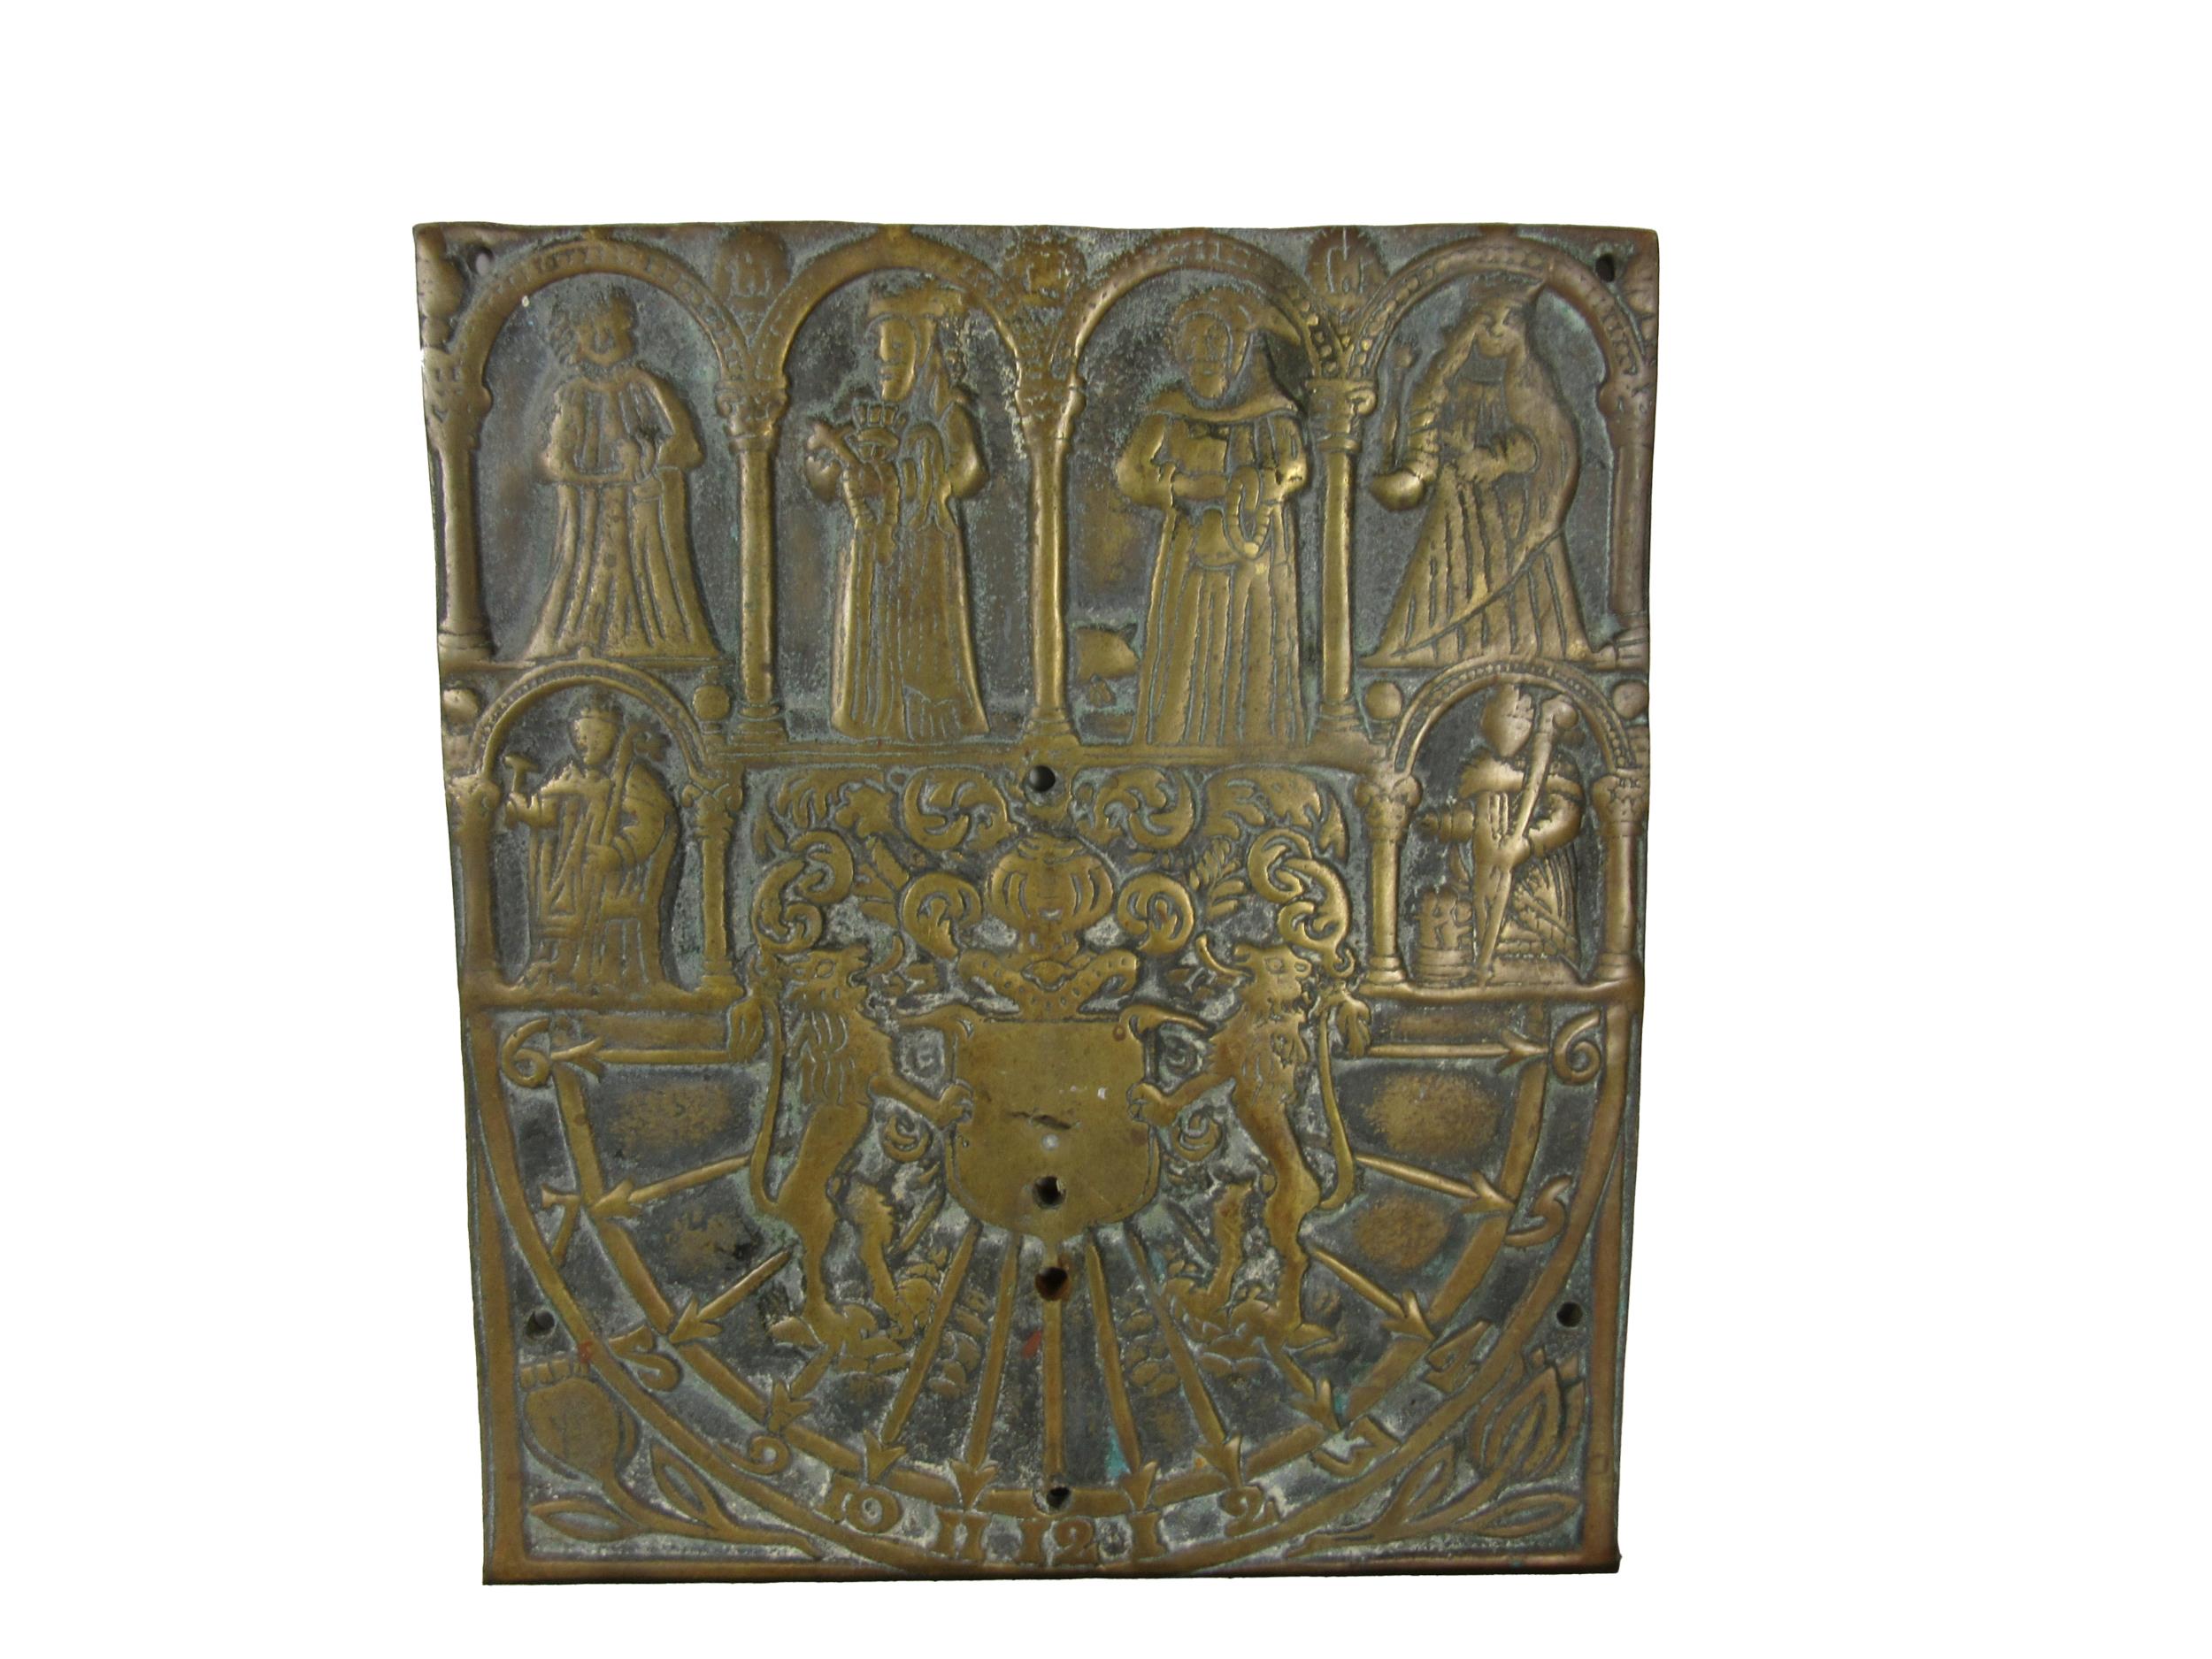 An antique heavy brass Sundial, of square format decorated with medieval type figures, and a central